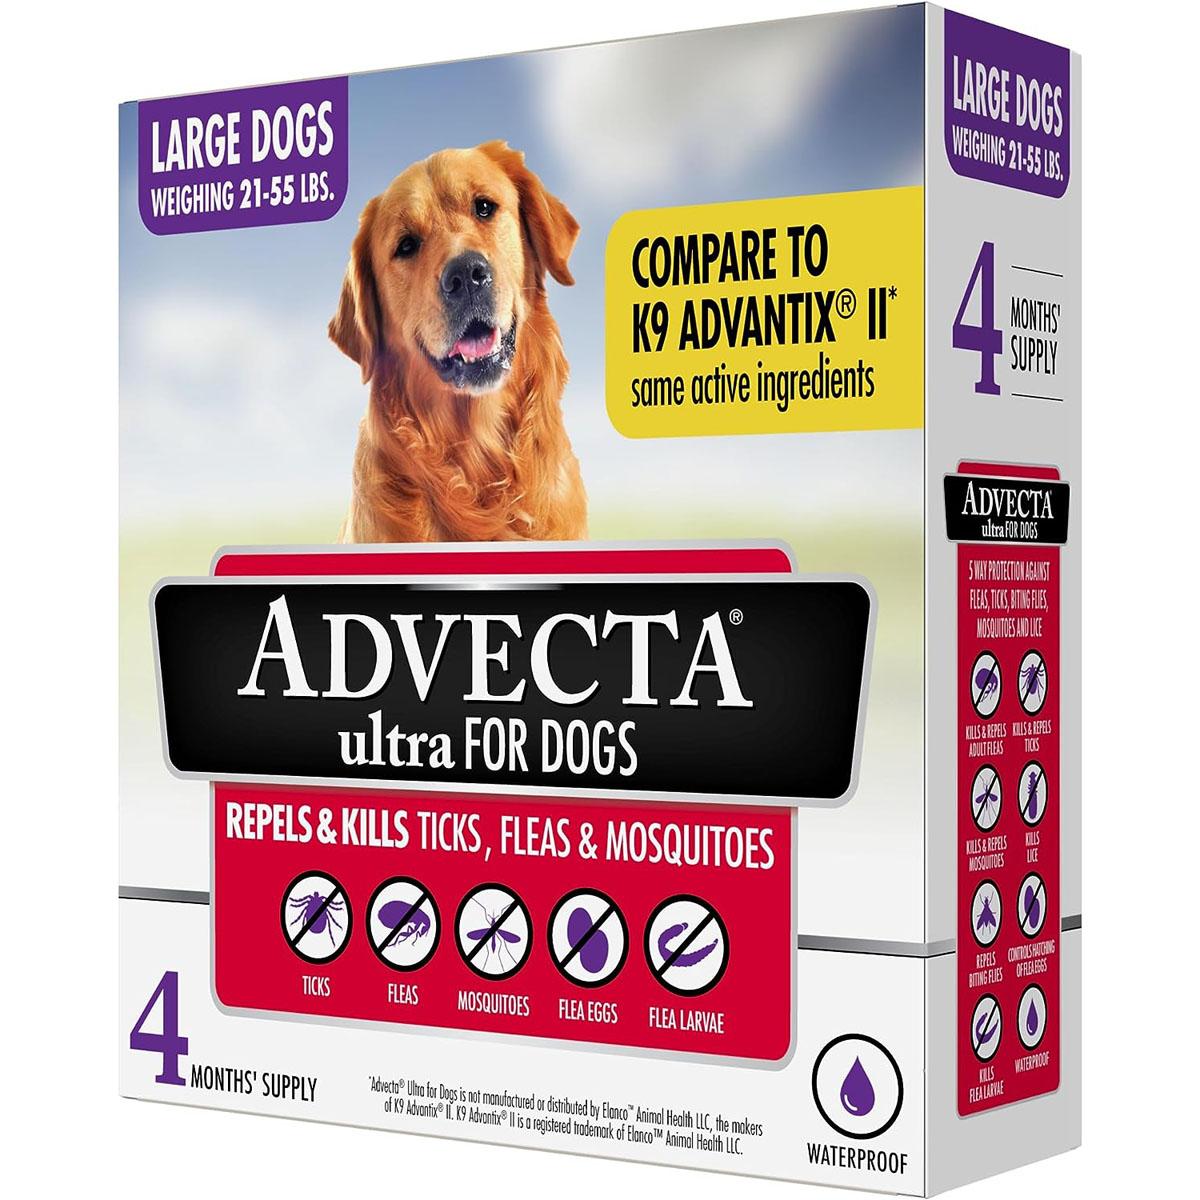 Advecta Ultra Flea & Tick Prevention For Dogs for $13.98 Shipped